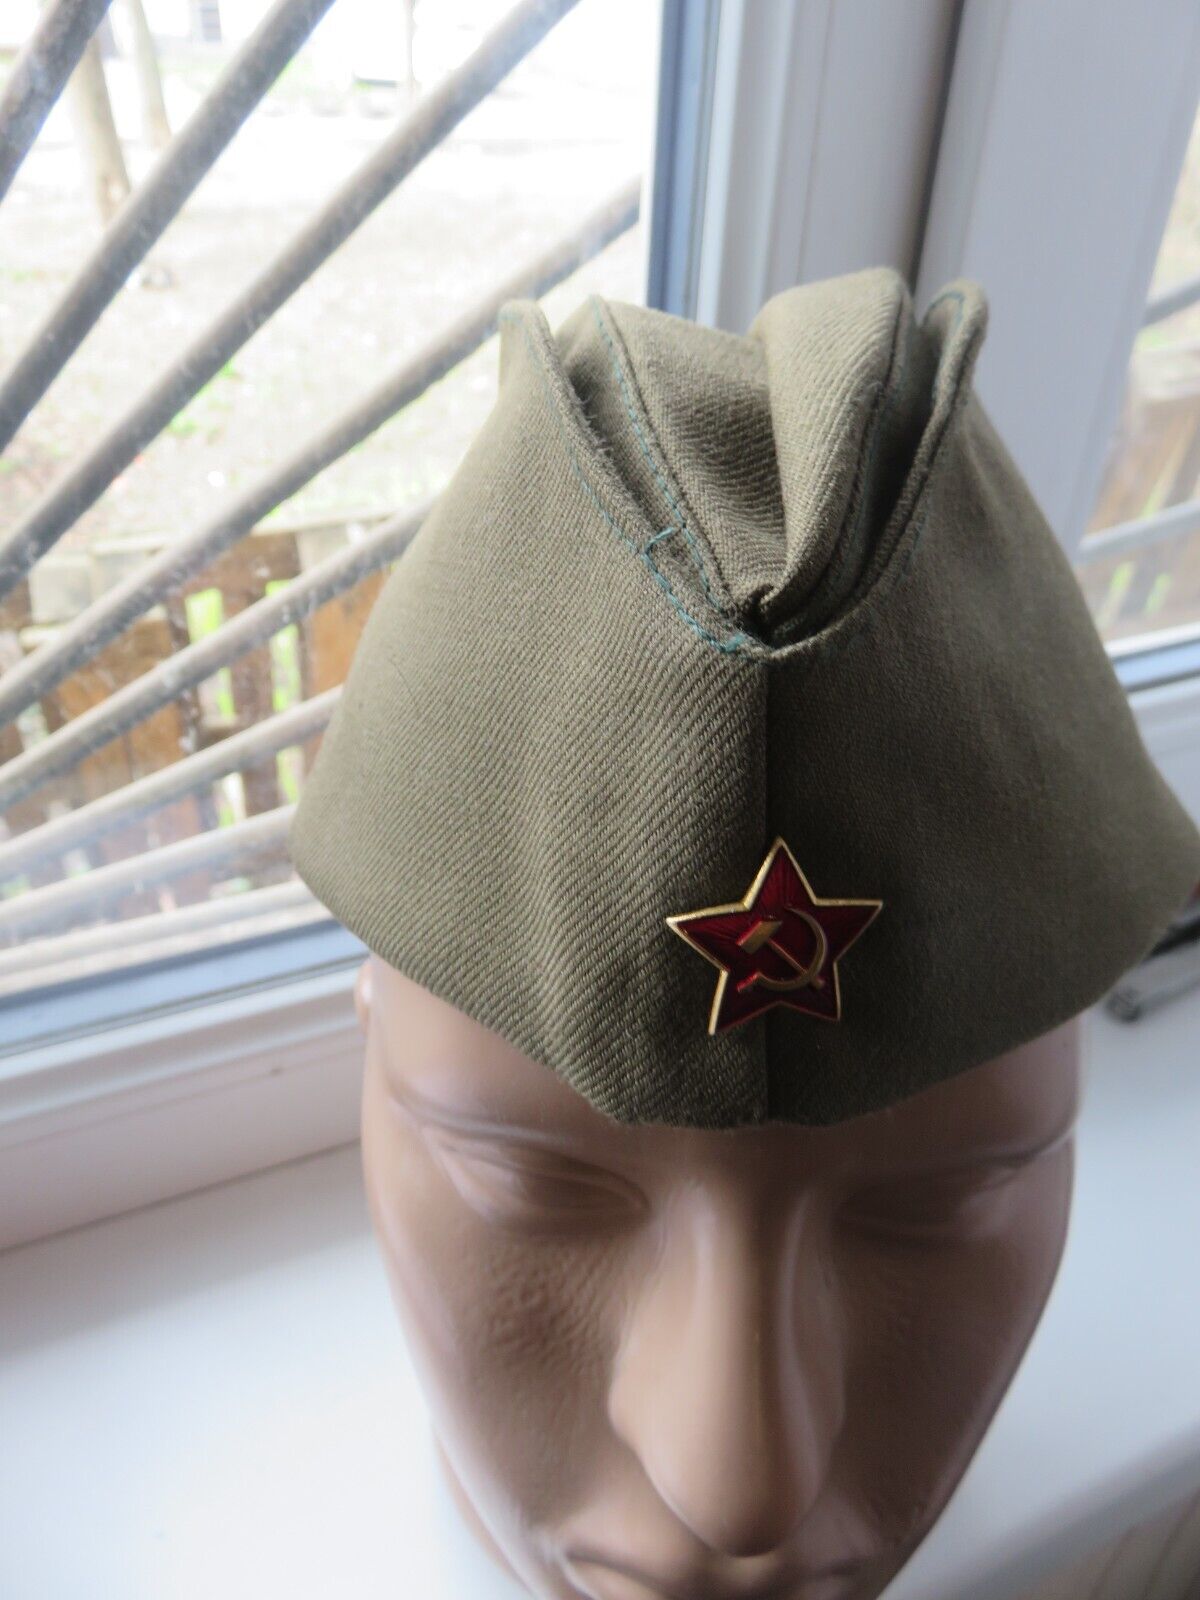 vintage Soviet Union military hat /cap - PILOTKA Red Army USSR soldier's new № 3